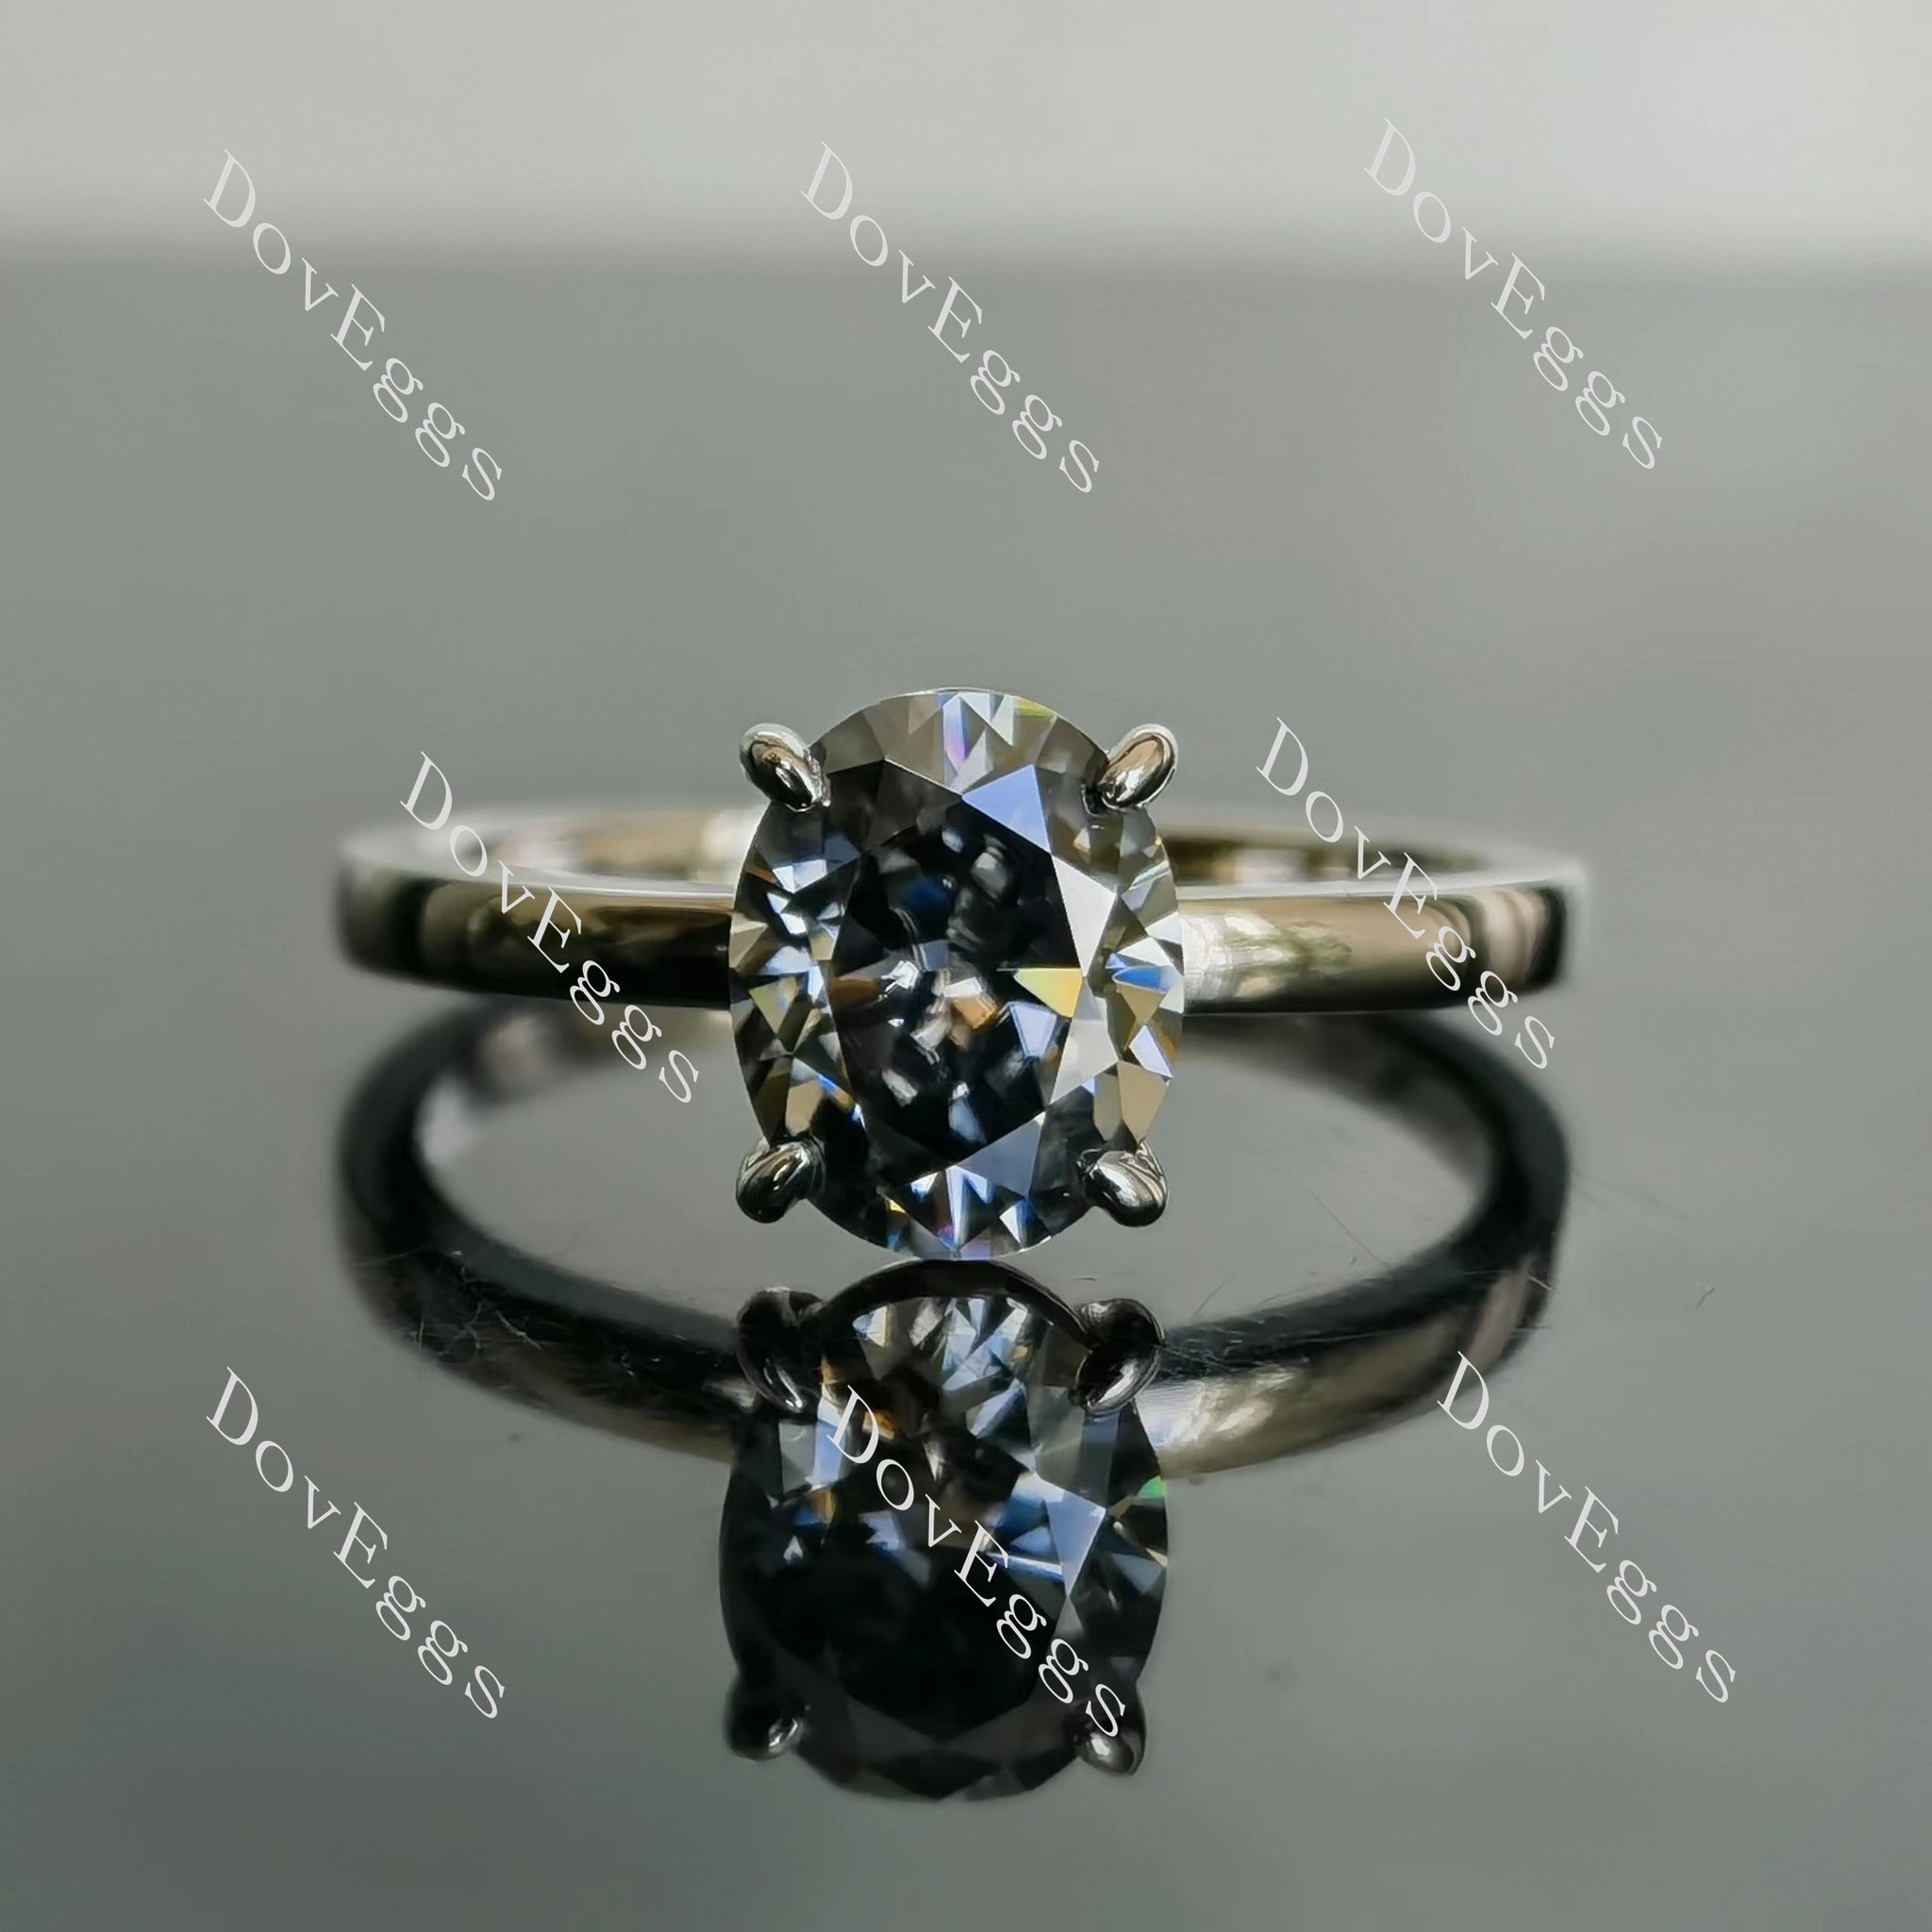 Bailey Jackson oval solitaire stardust grey moissanite engagement ring